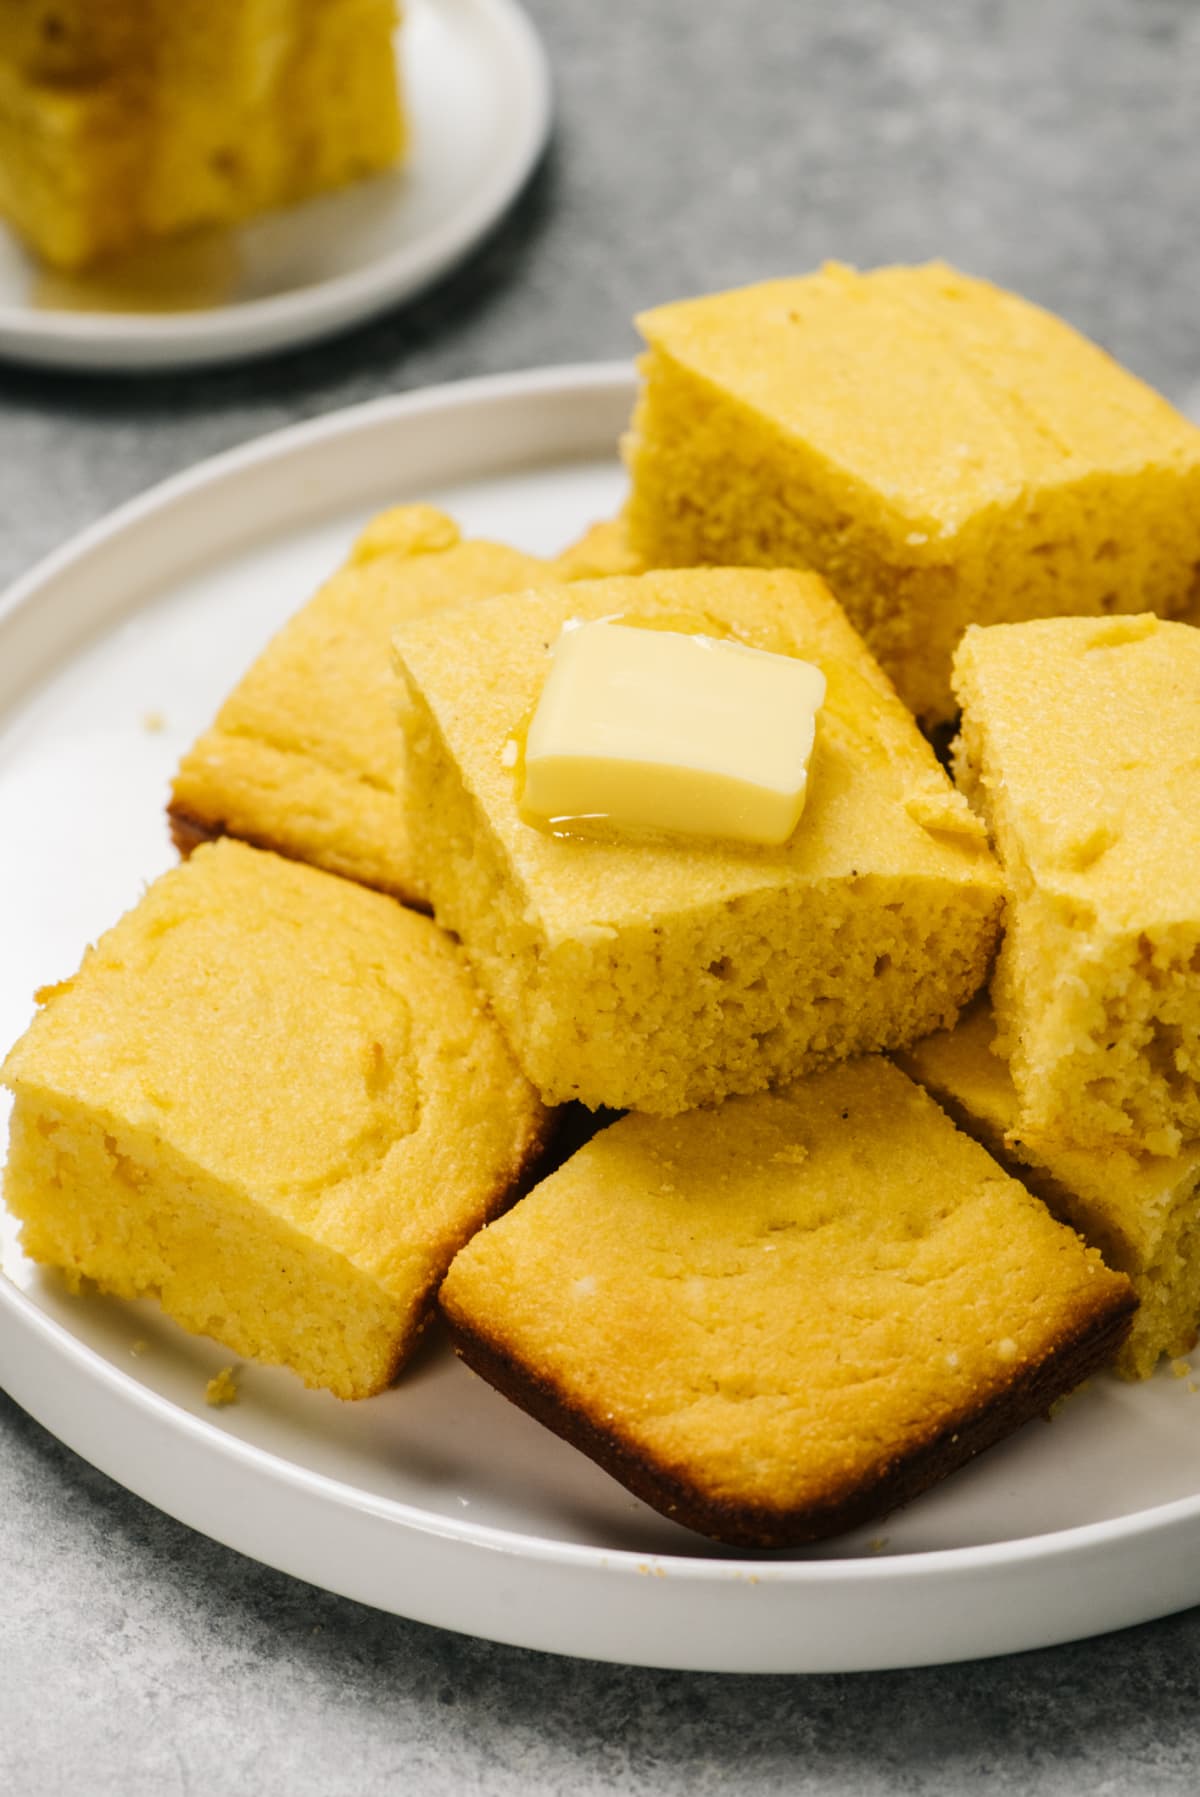 cornbread slices on a plate with a slice of butter on top